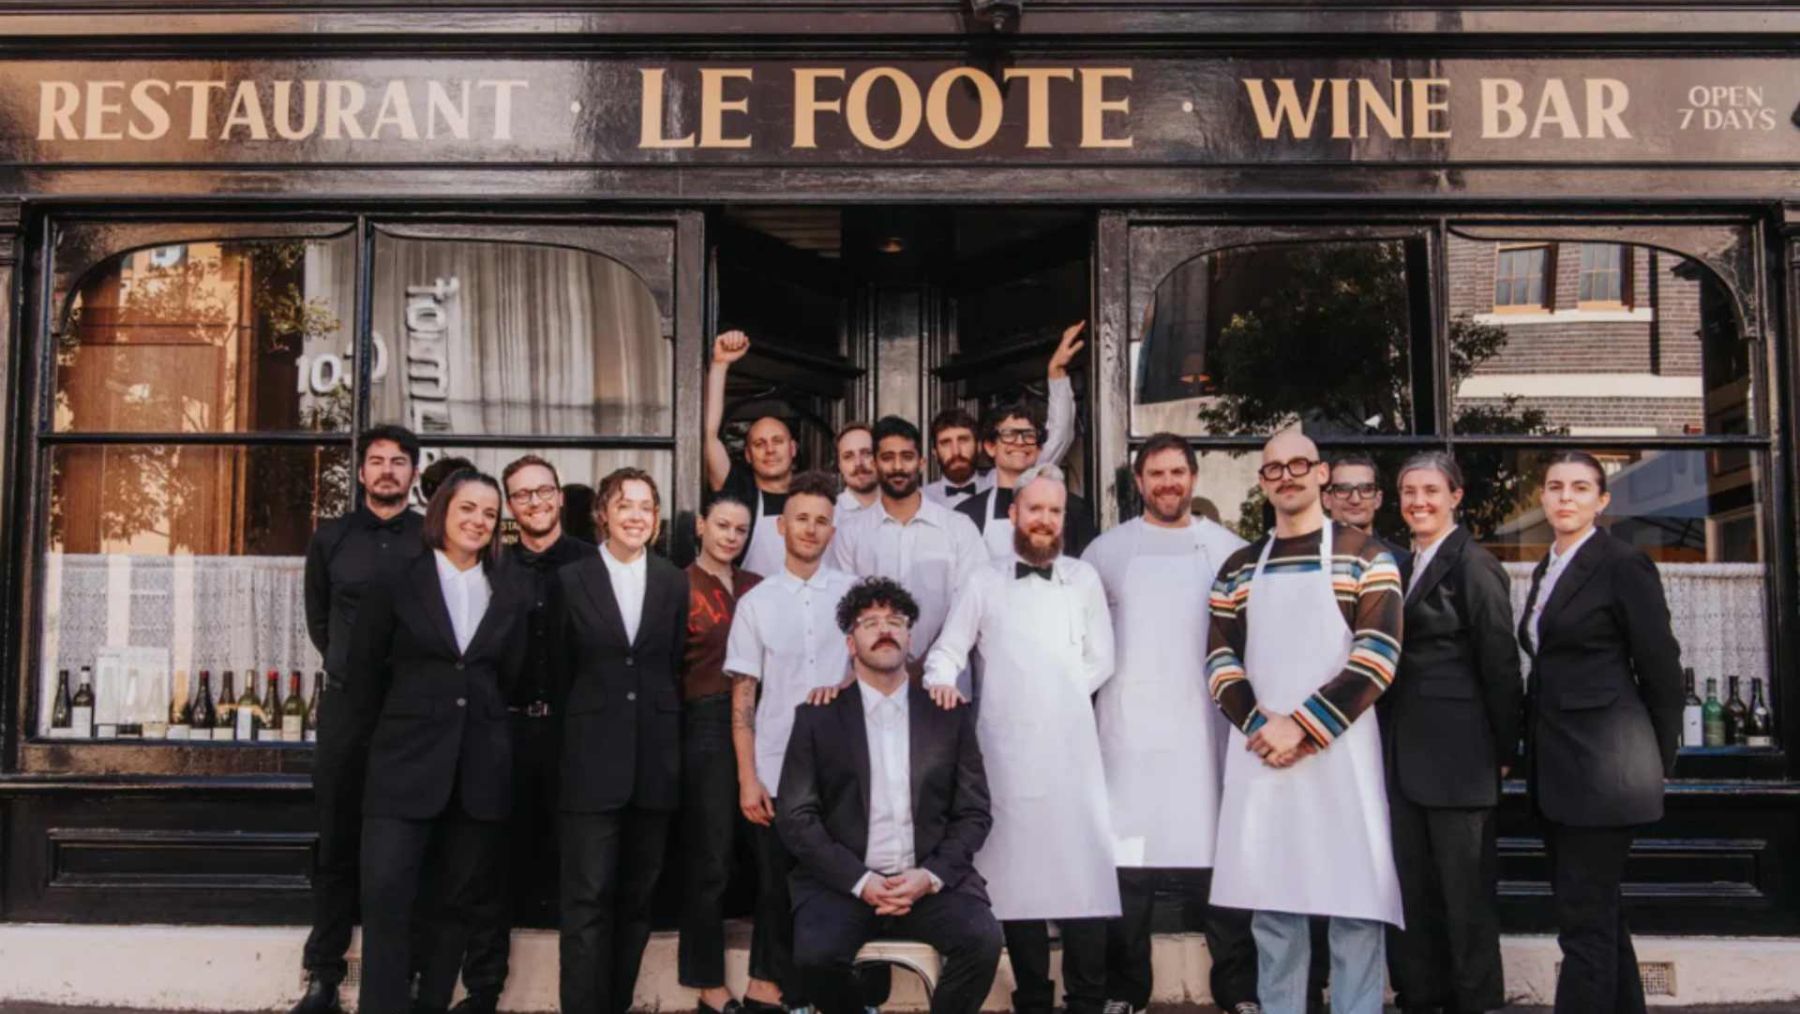 Le Foote Sydney's newest restaurants